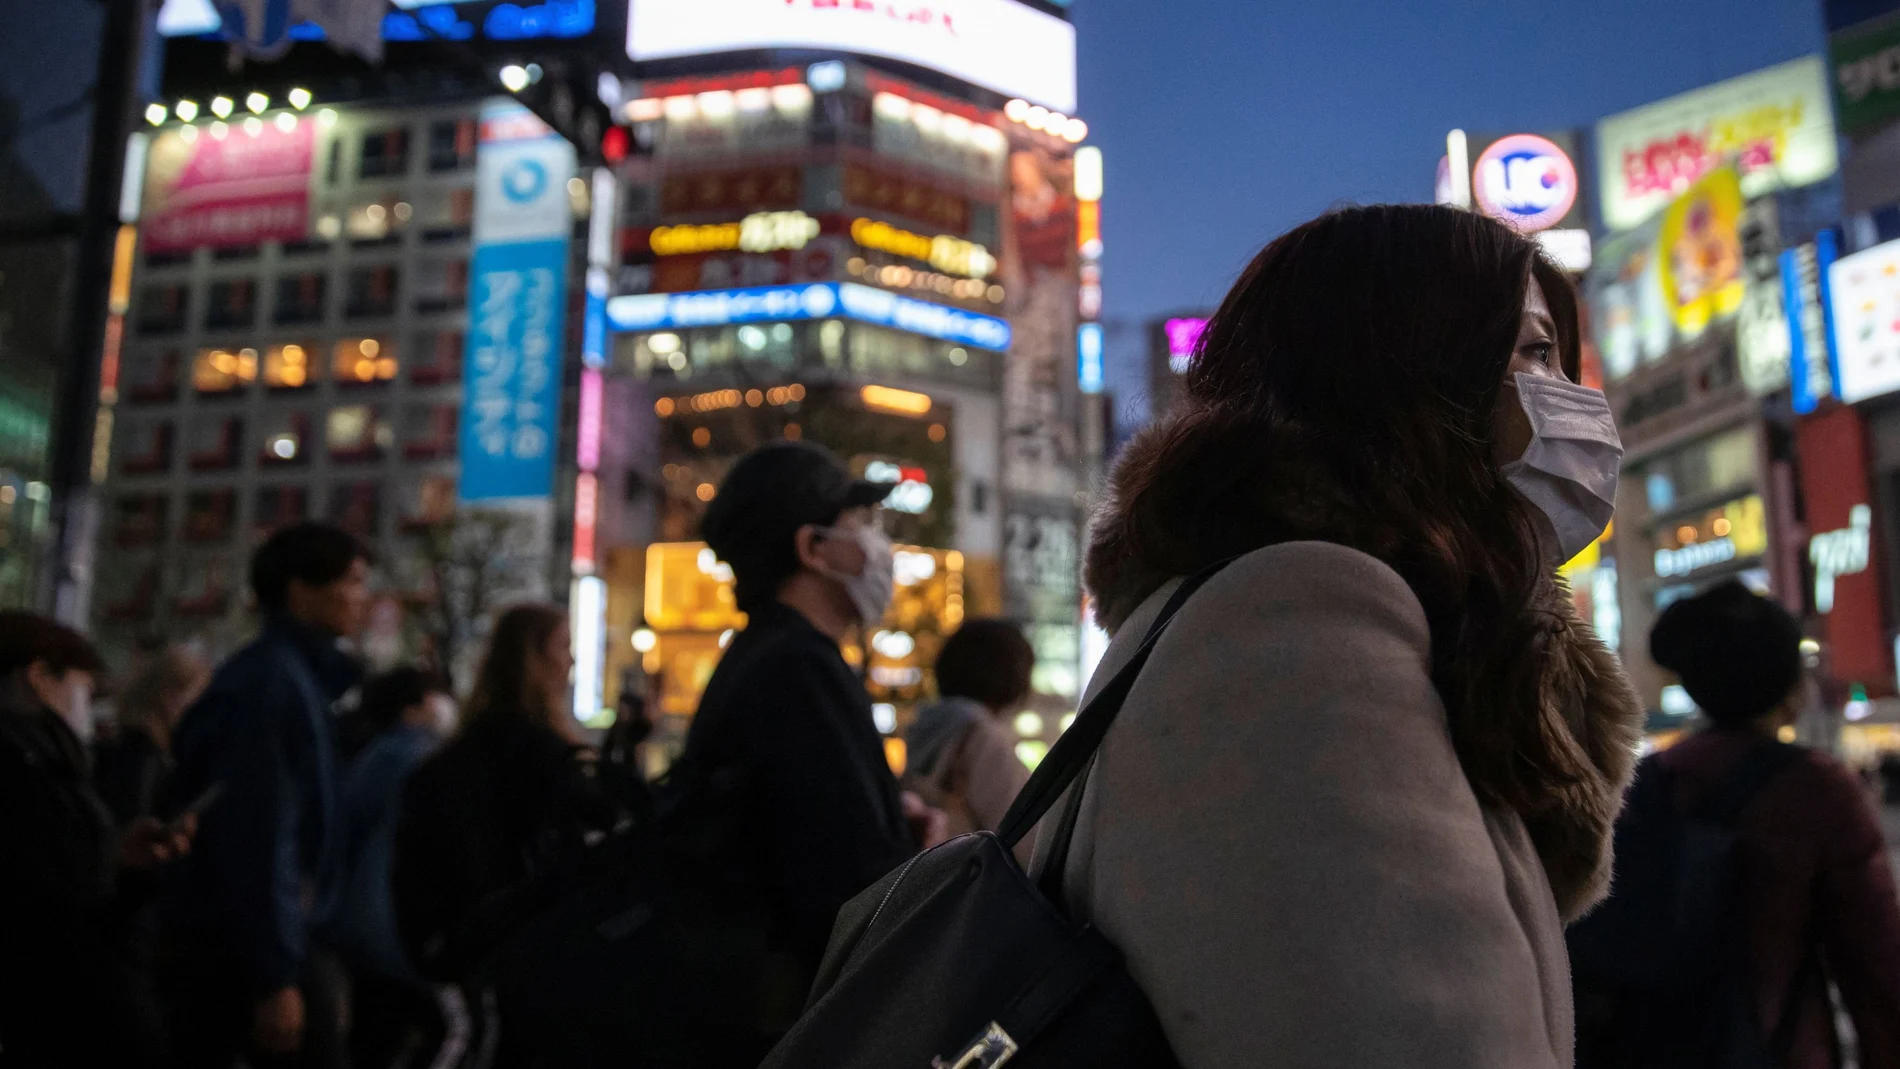 A woman wearing a protective mask is seen at the scramble crossing in Shibuya shopping district, also known as Shibuya crossing, following the outbreak of the coronavirus in Tokyo